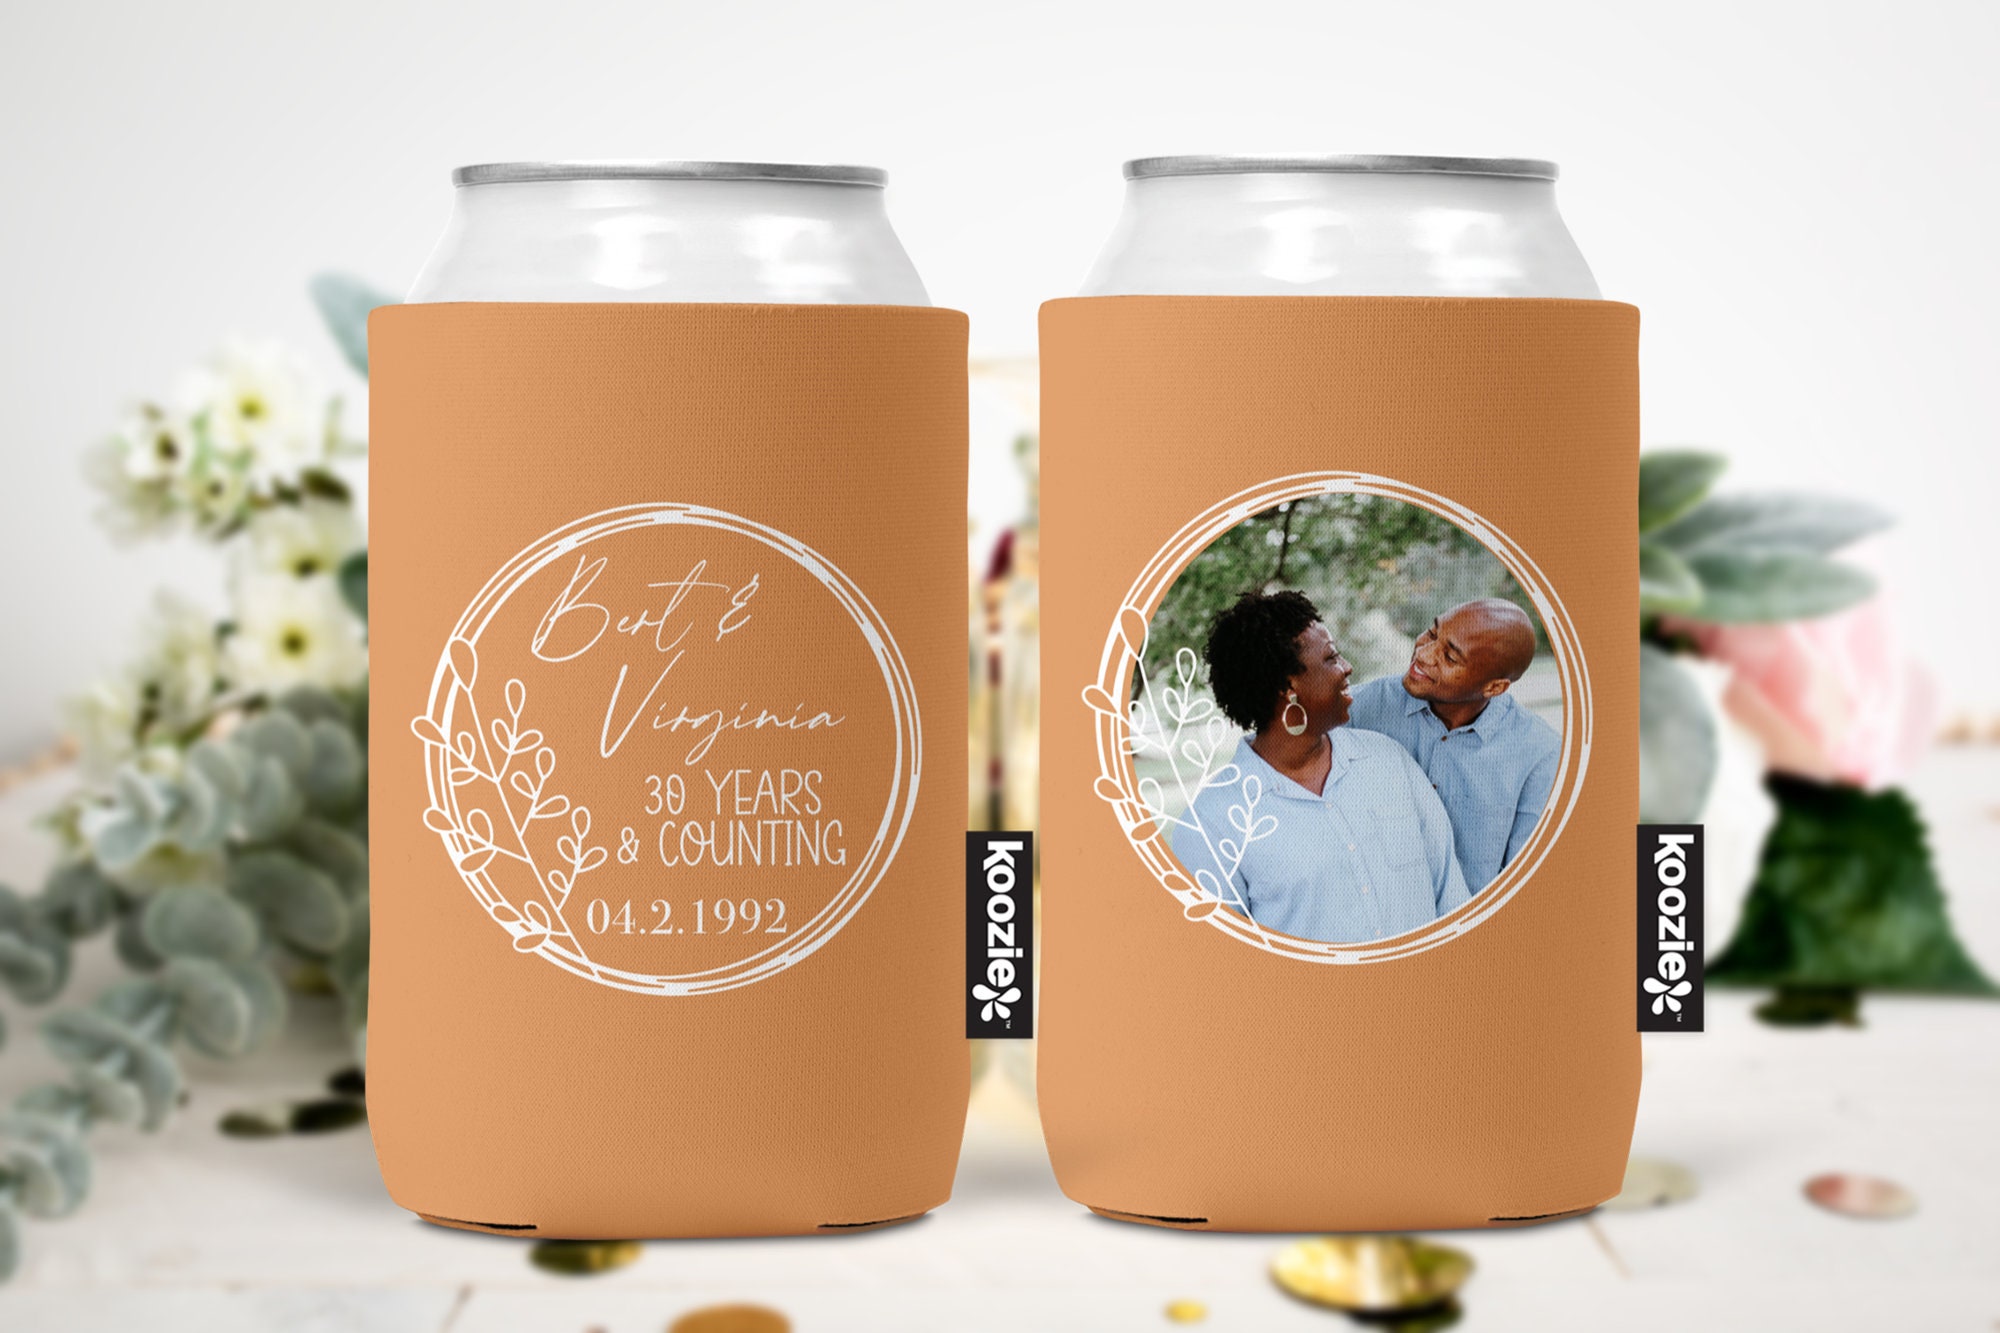 Can Cooler Gift For Wife You And Me We Got This Koozie On Anniversary -  Sandjest